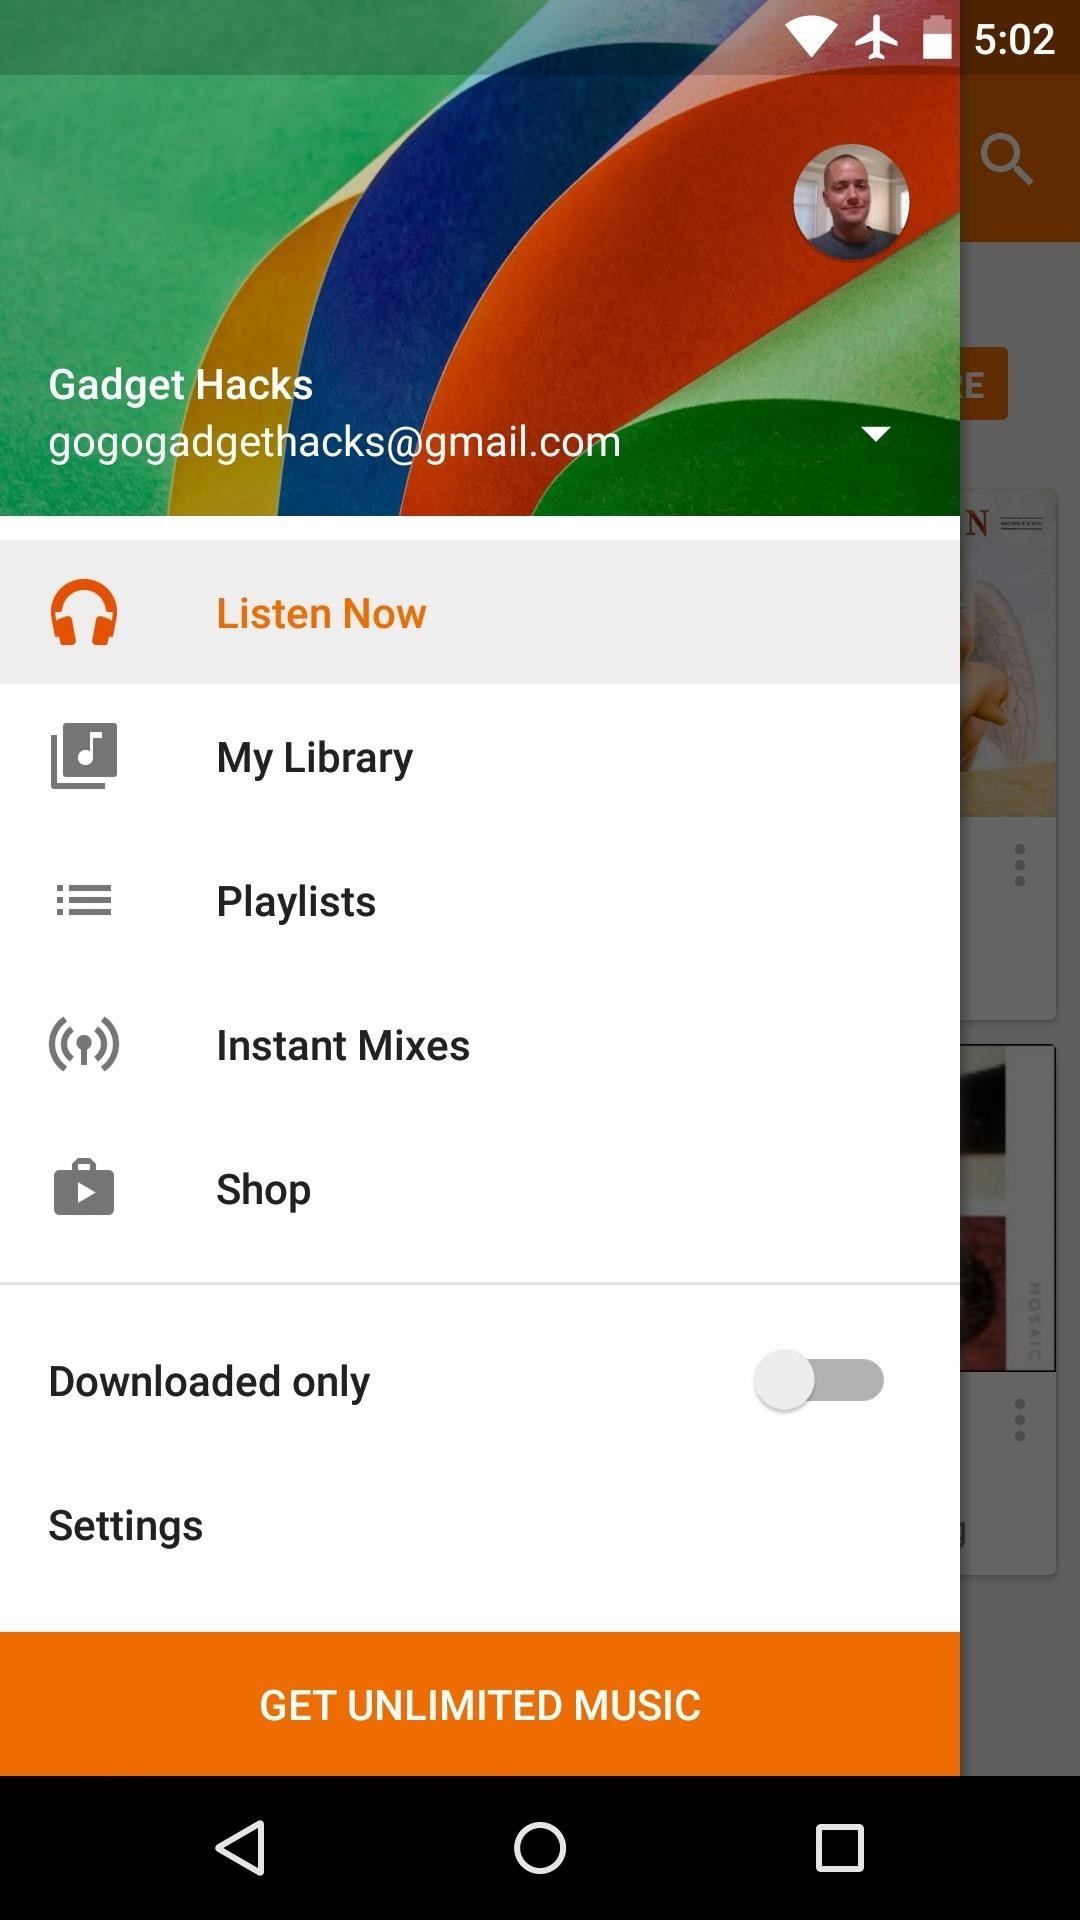 How to Make Google Play Music's Interface Better on Android